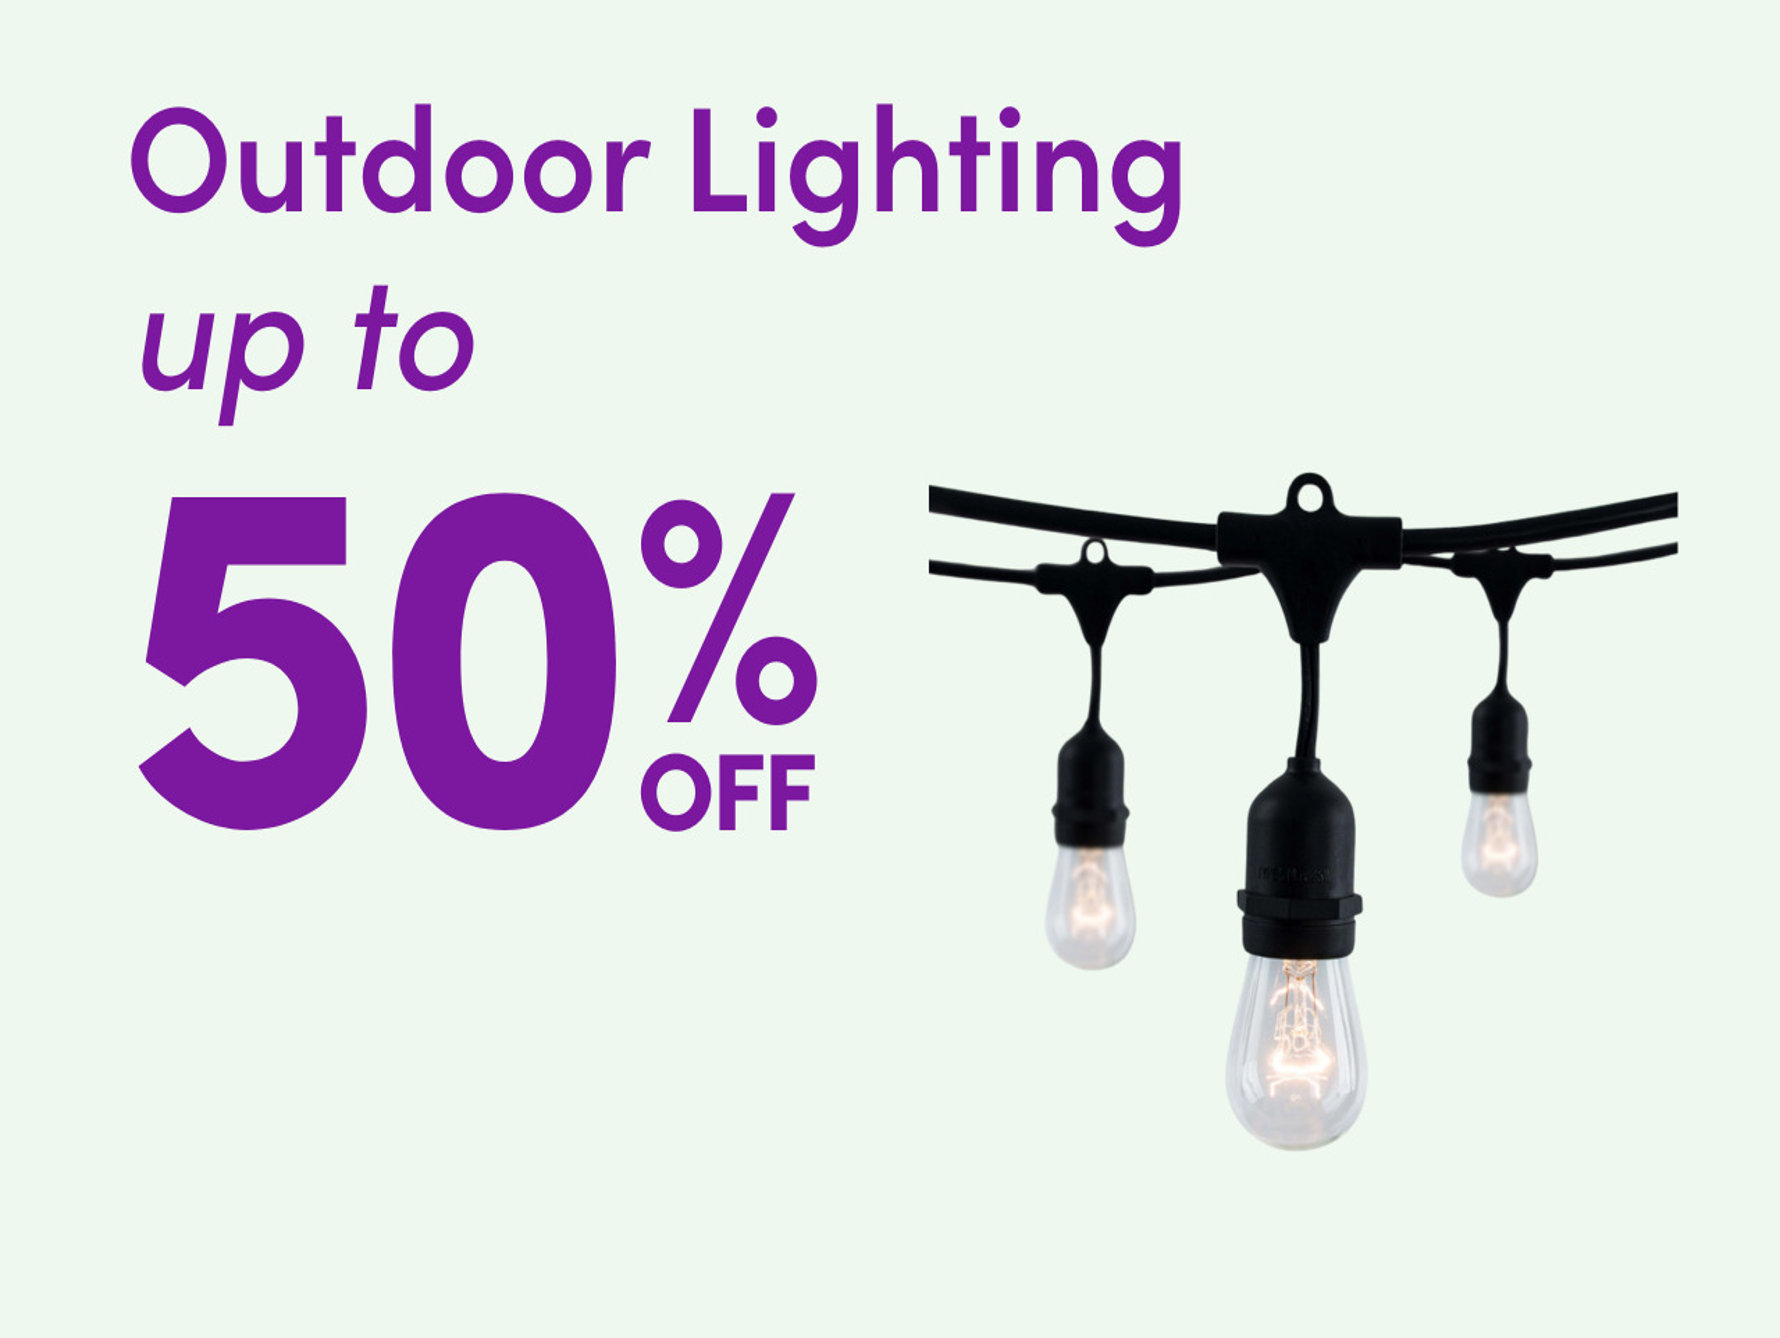 Outdoor Lighting up to 50% off